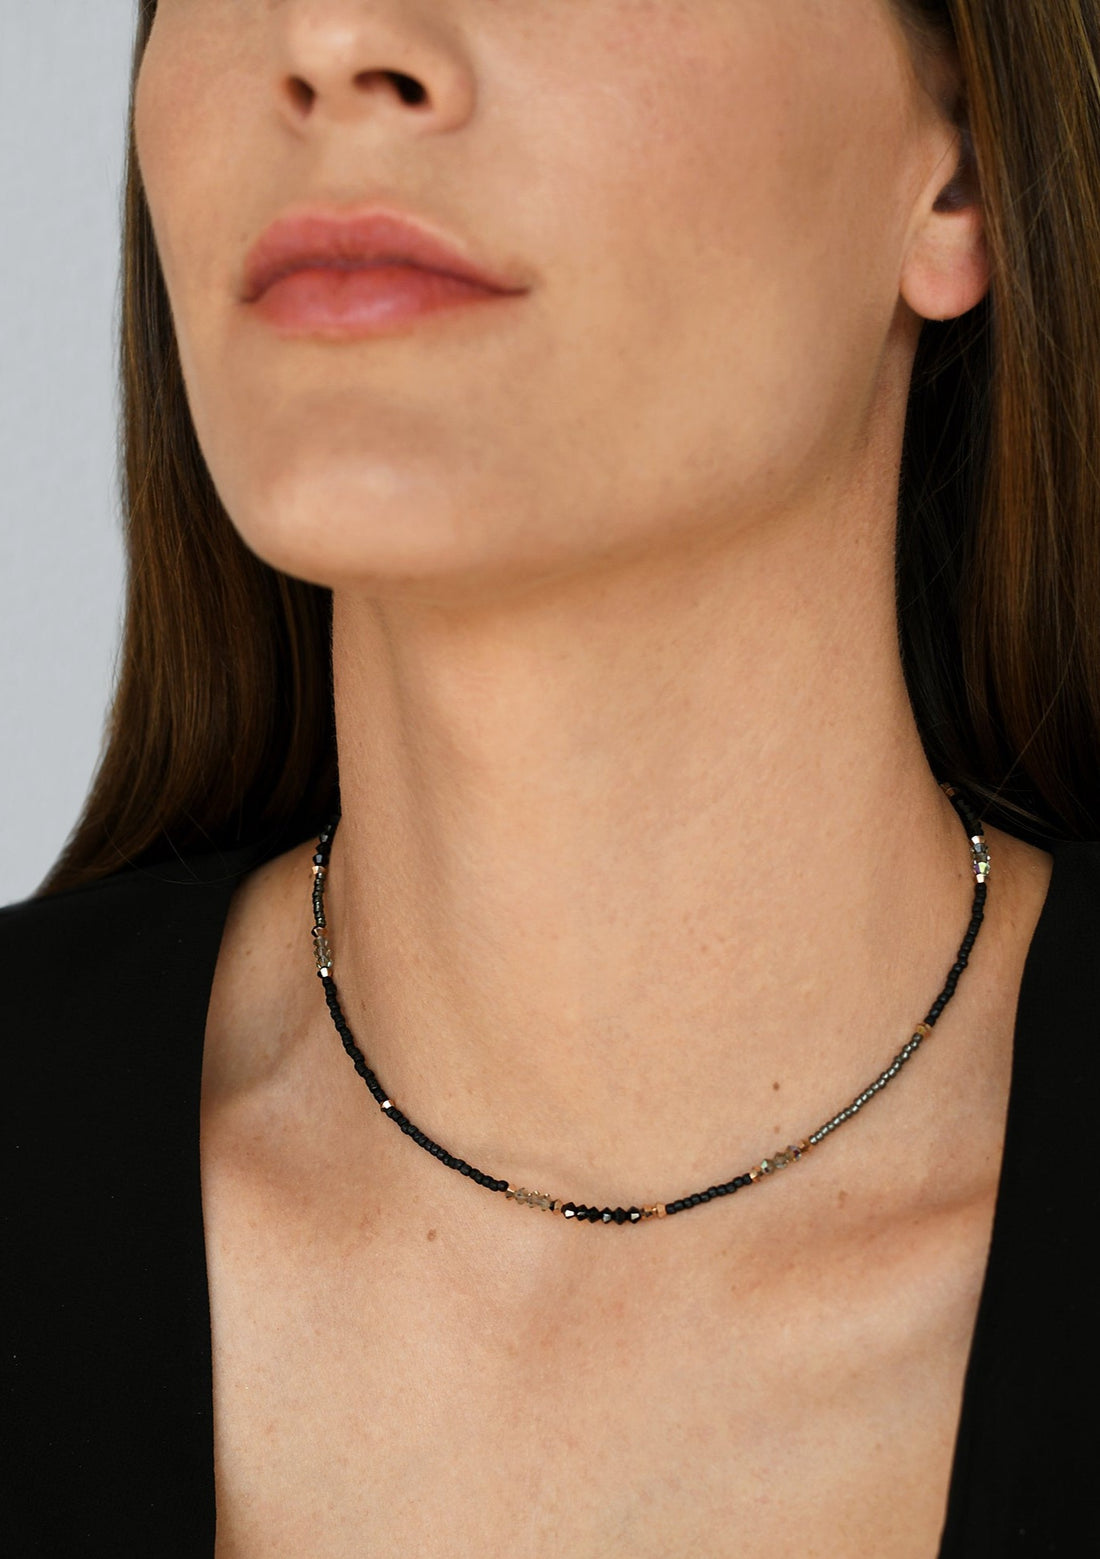 Fair Trade Ethical Black Olive Resin Necklace | Uplift Fair Trade